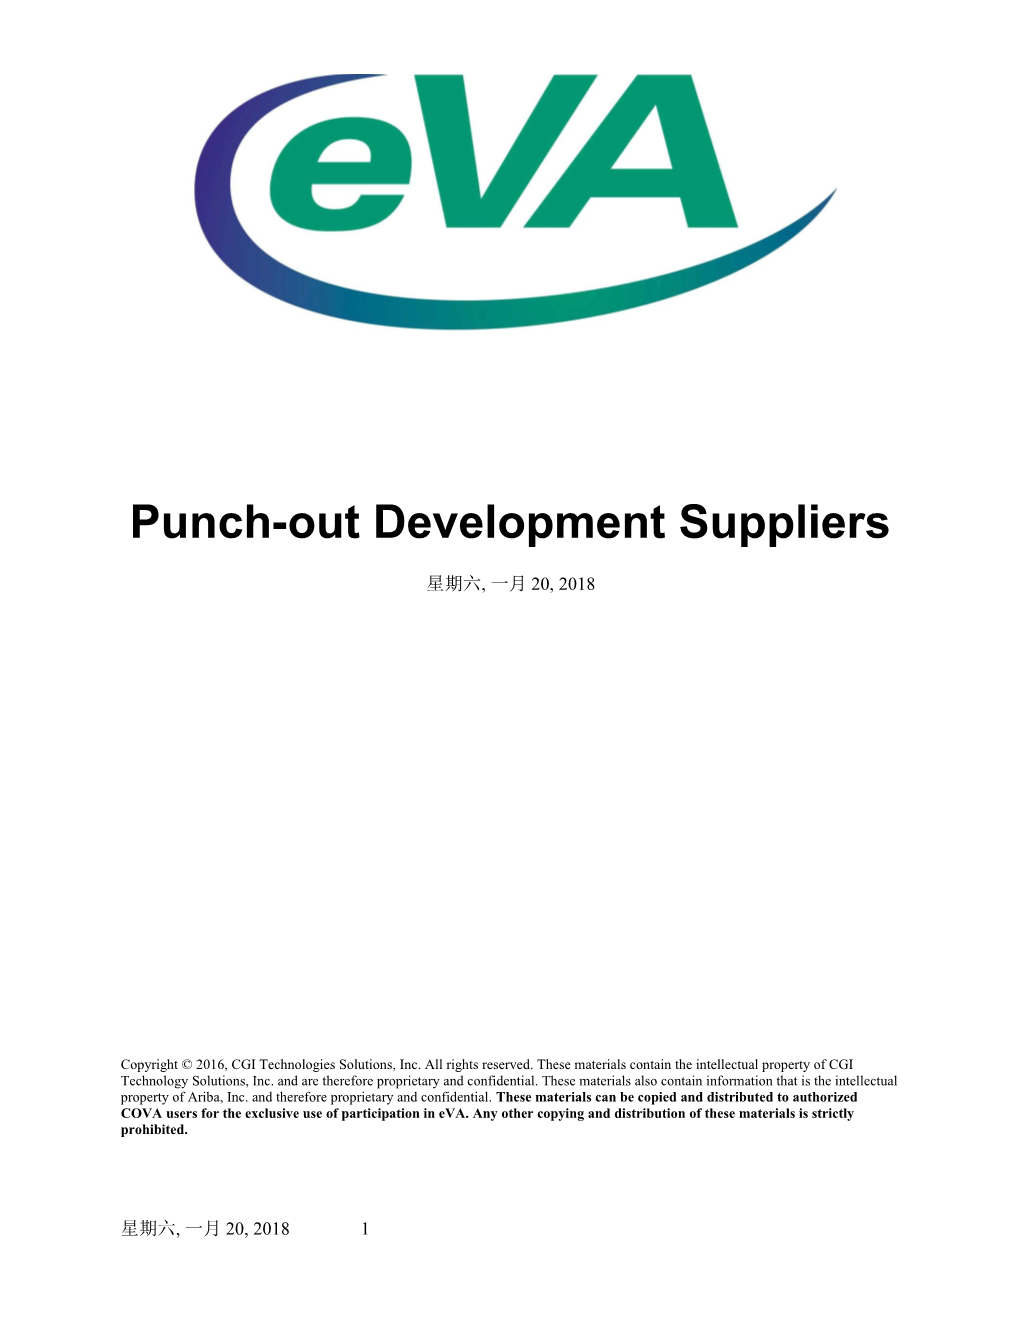 Punch-Out Development Suppliers